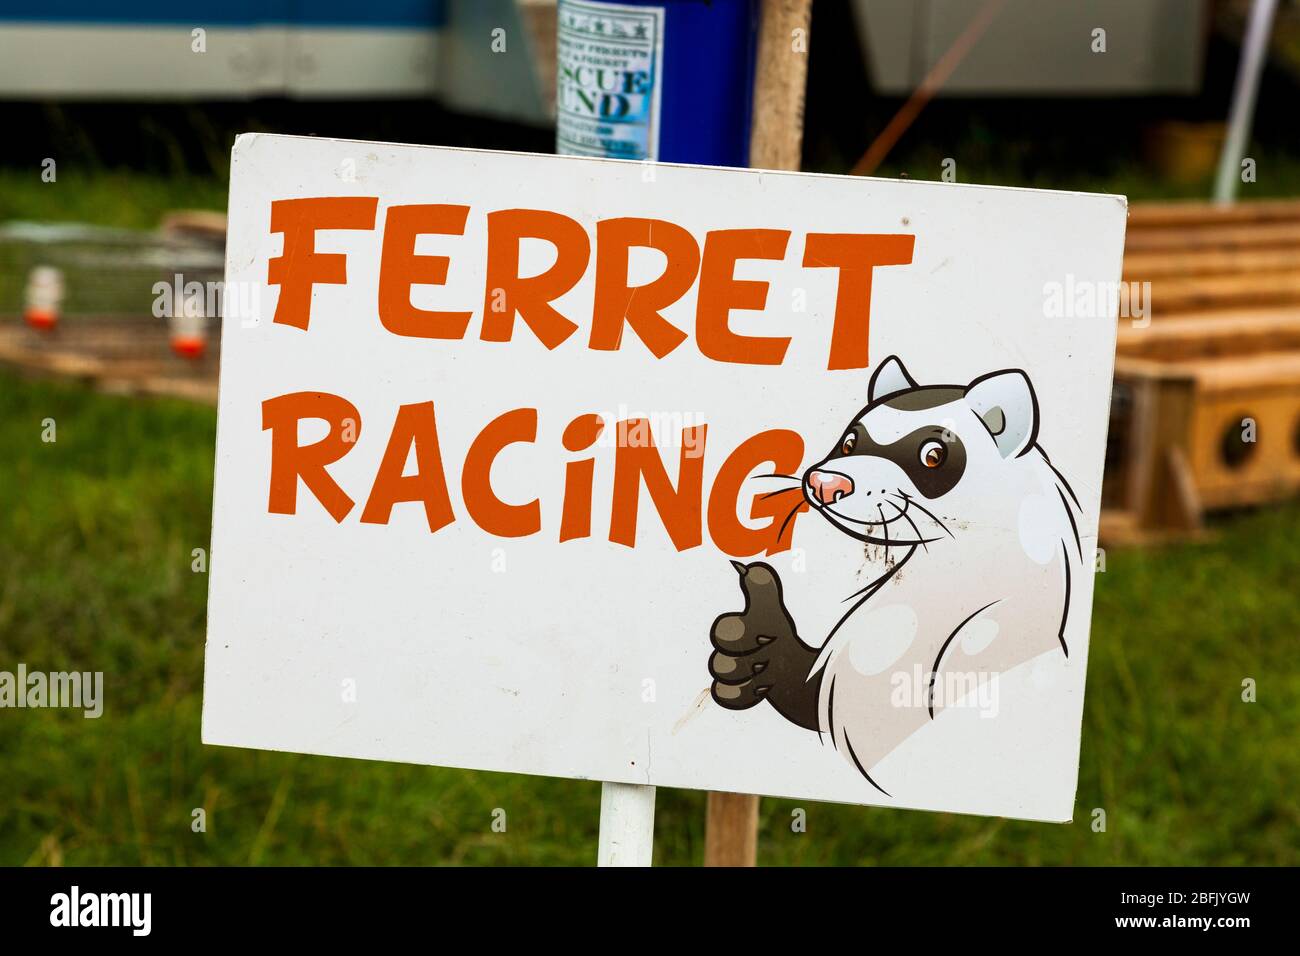 A ferret racing sign at a country show in the U.K. Stock Photo